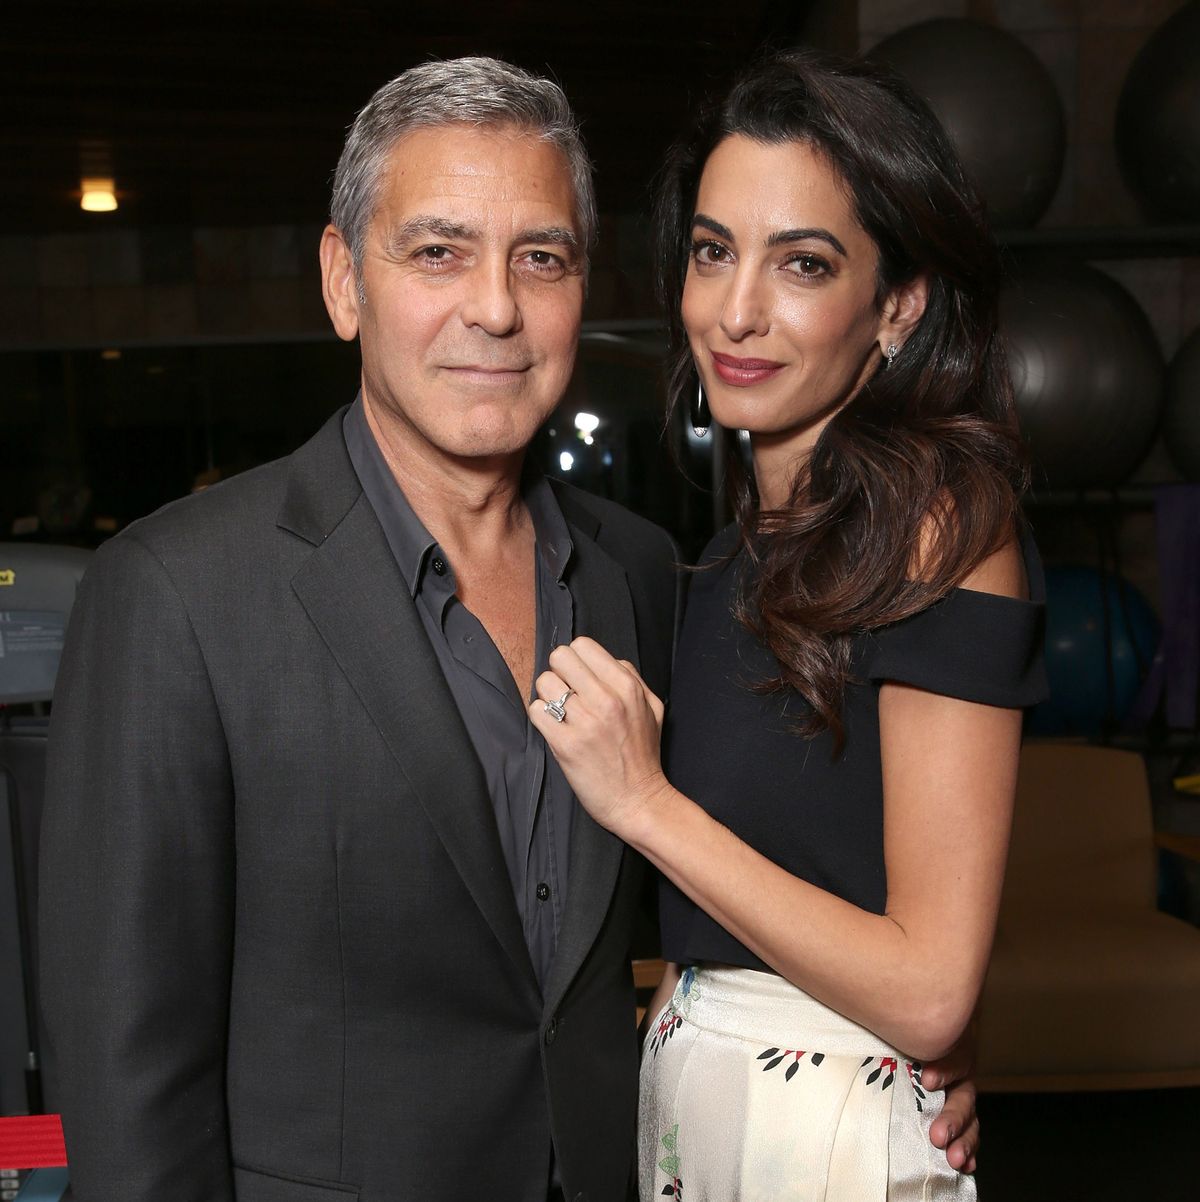 Amal Clooney Joined Entrepreneurs From Around the World at